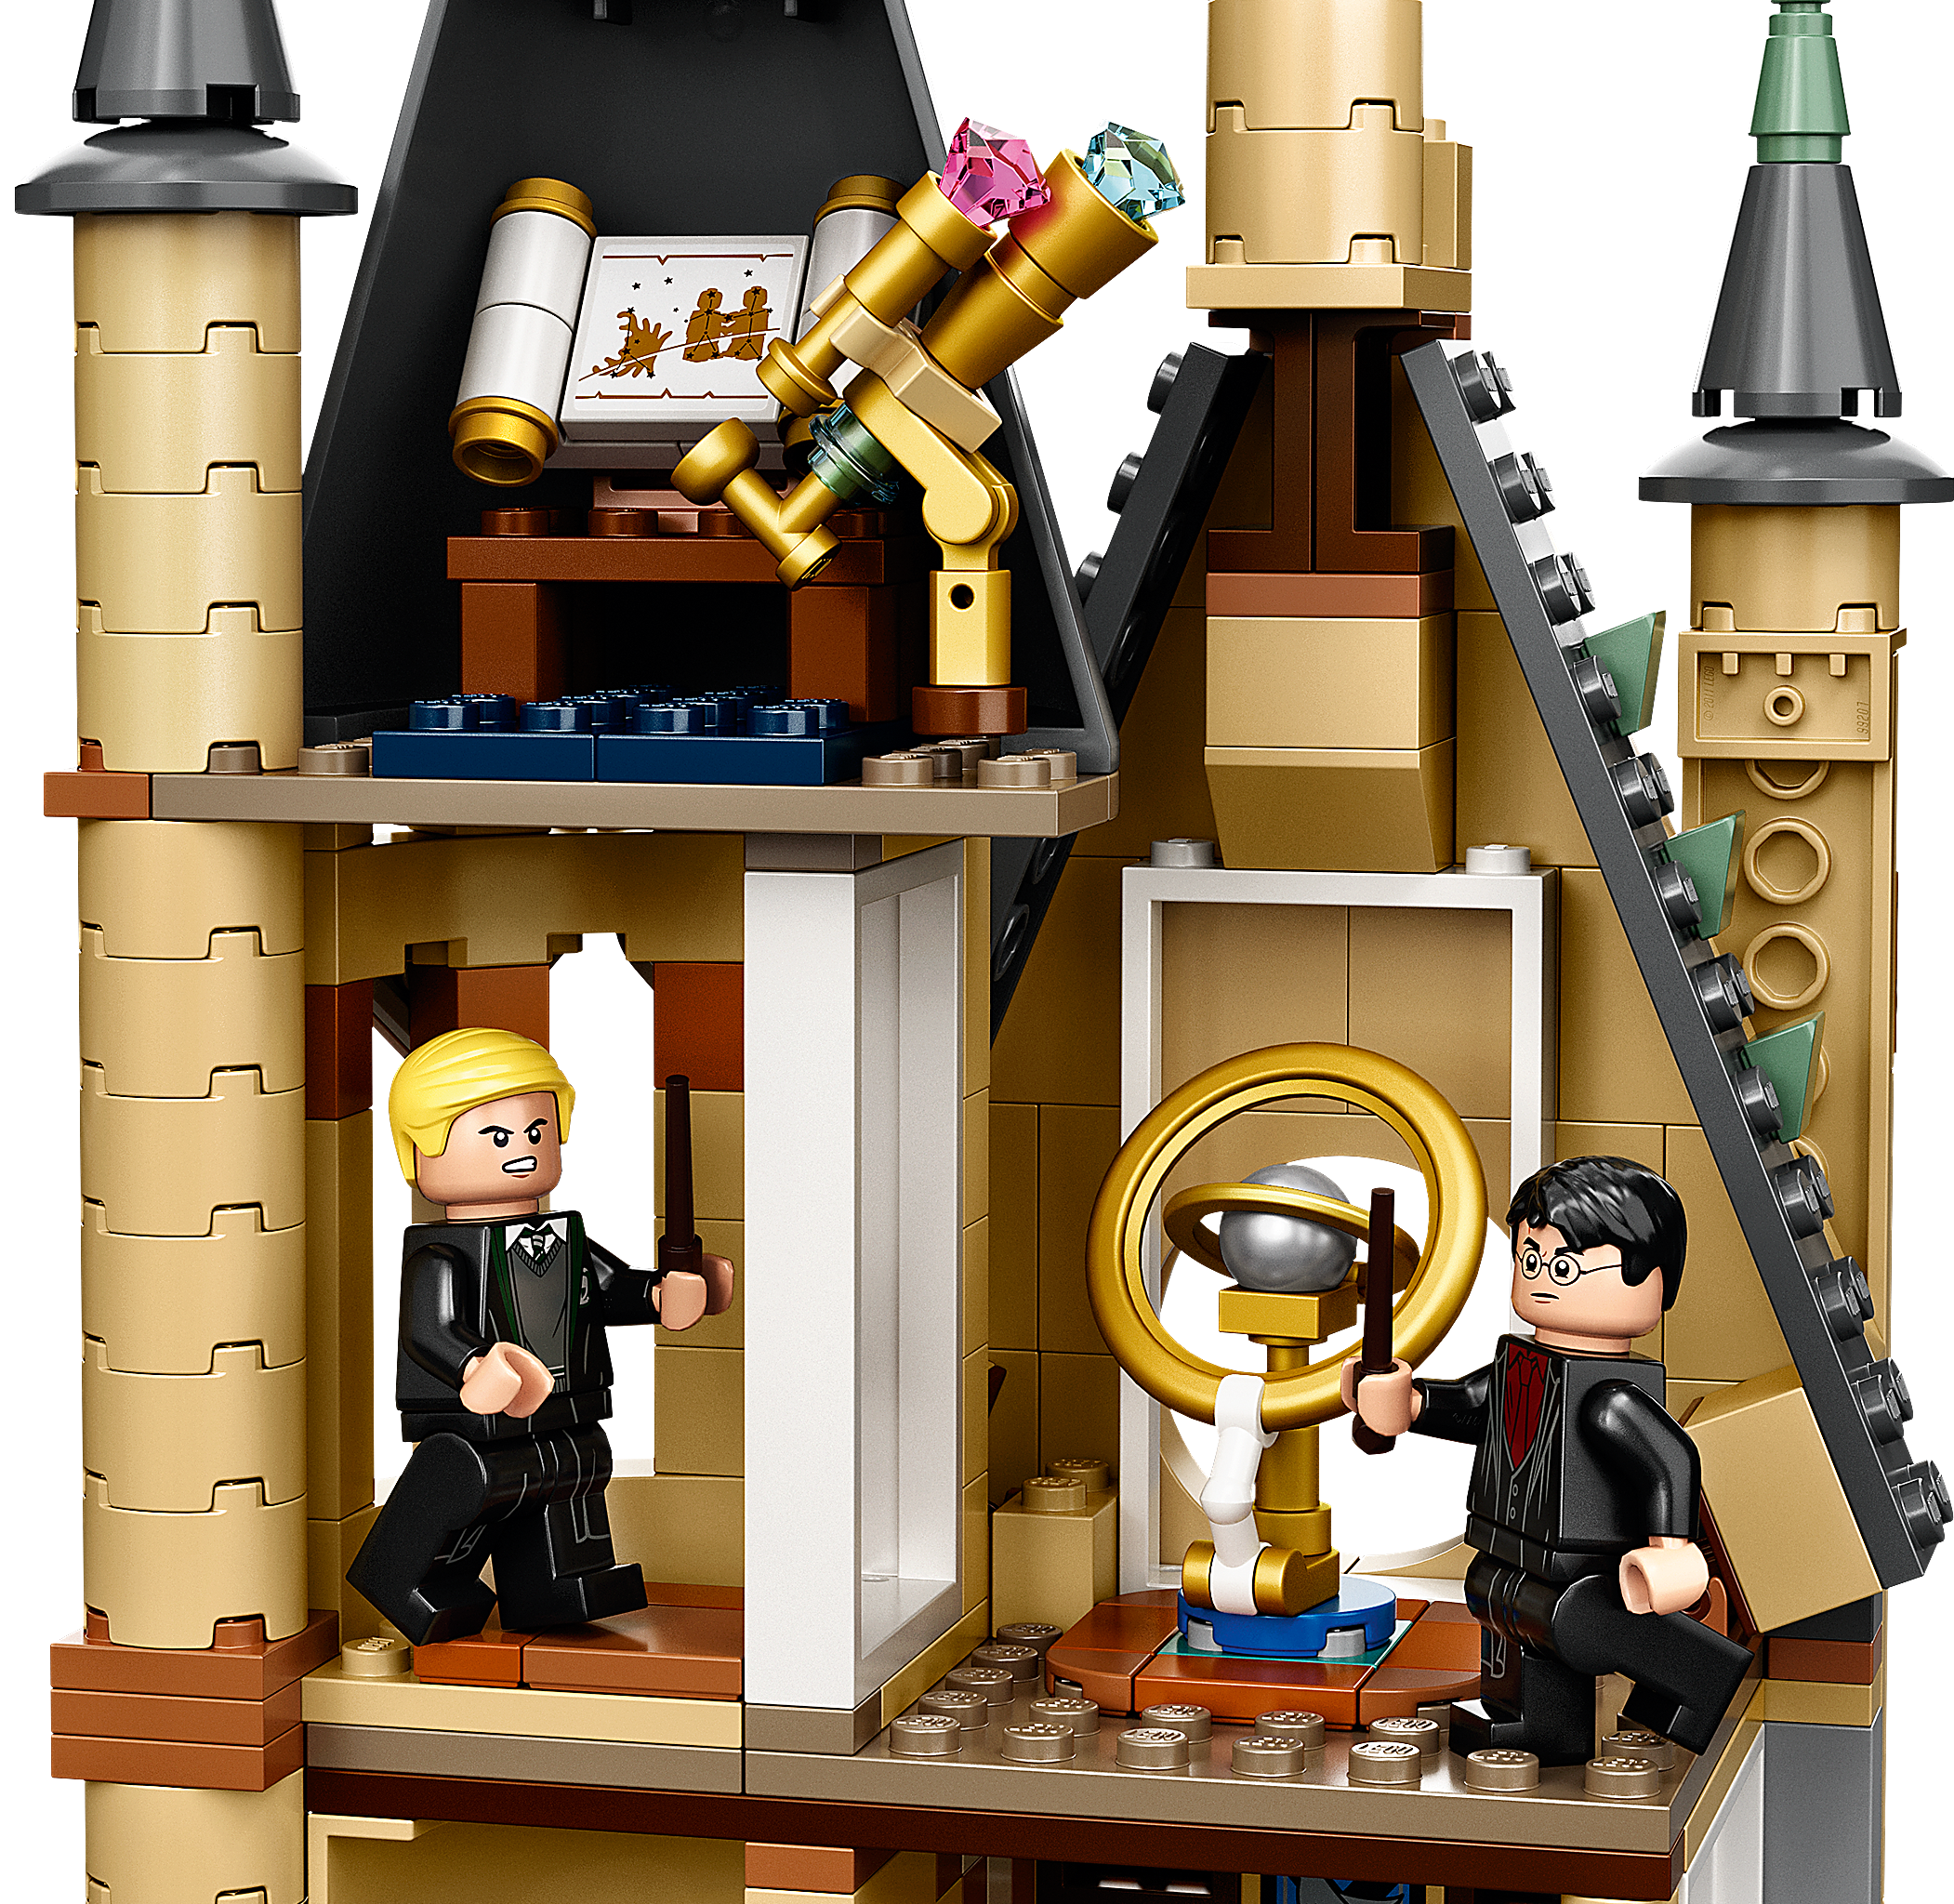 Hogwarts™ Astronomy Tower 75969 | Harry Potter™ | Buy online at 